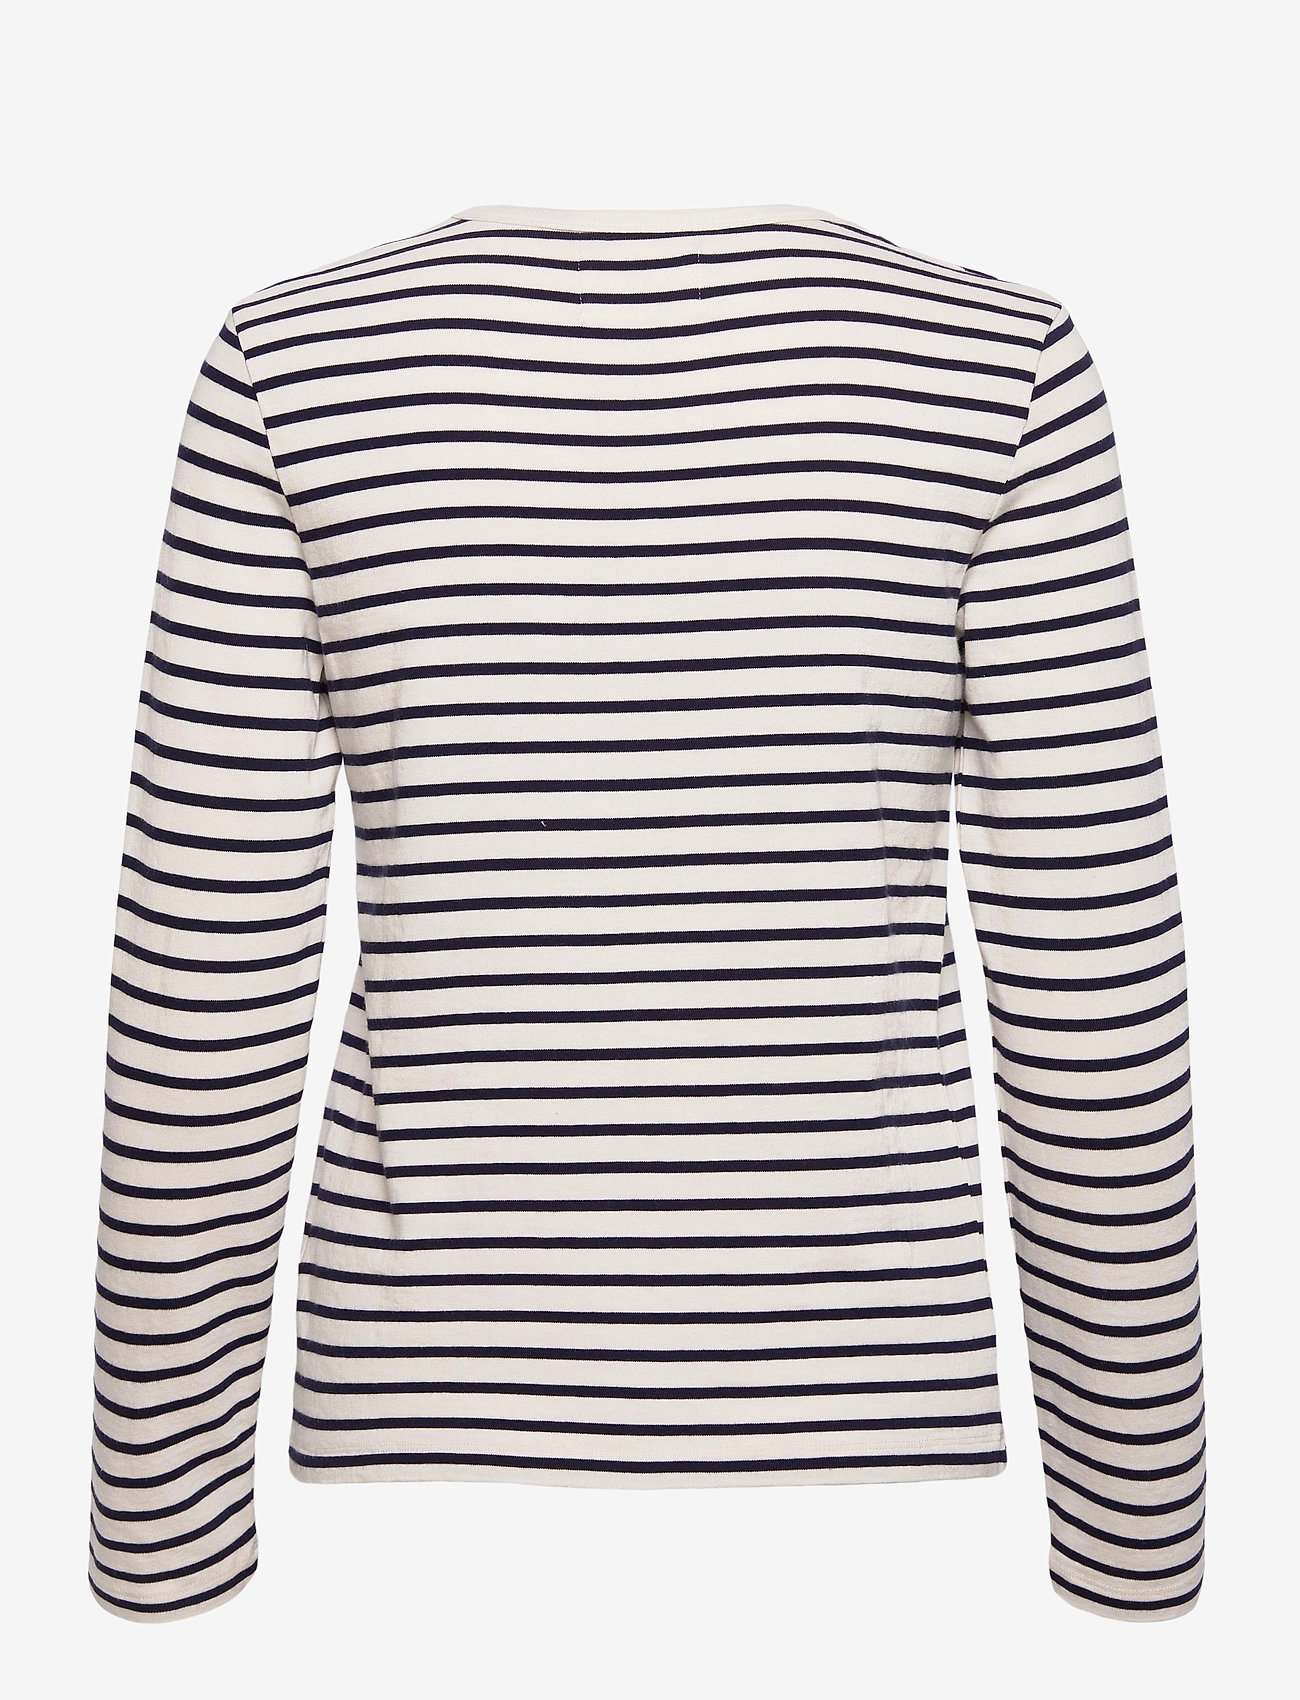 Double A by Wood Wood - Moa stripe long sleeve - t-shirts & tops - off-white/navy stripes - 1